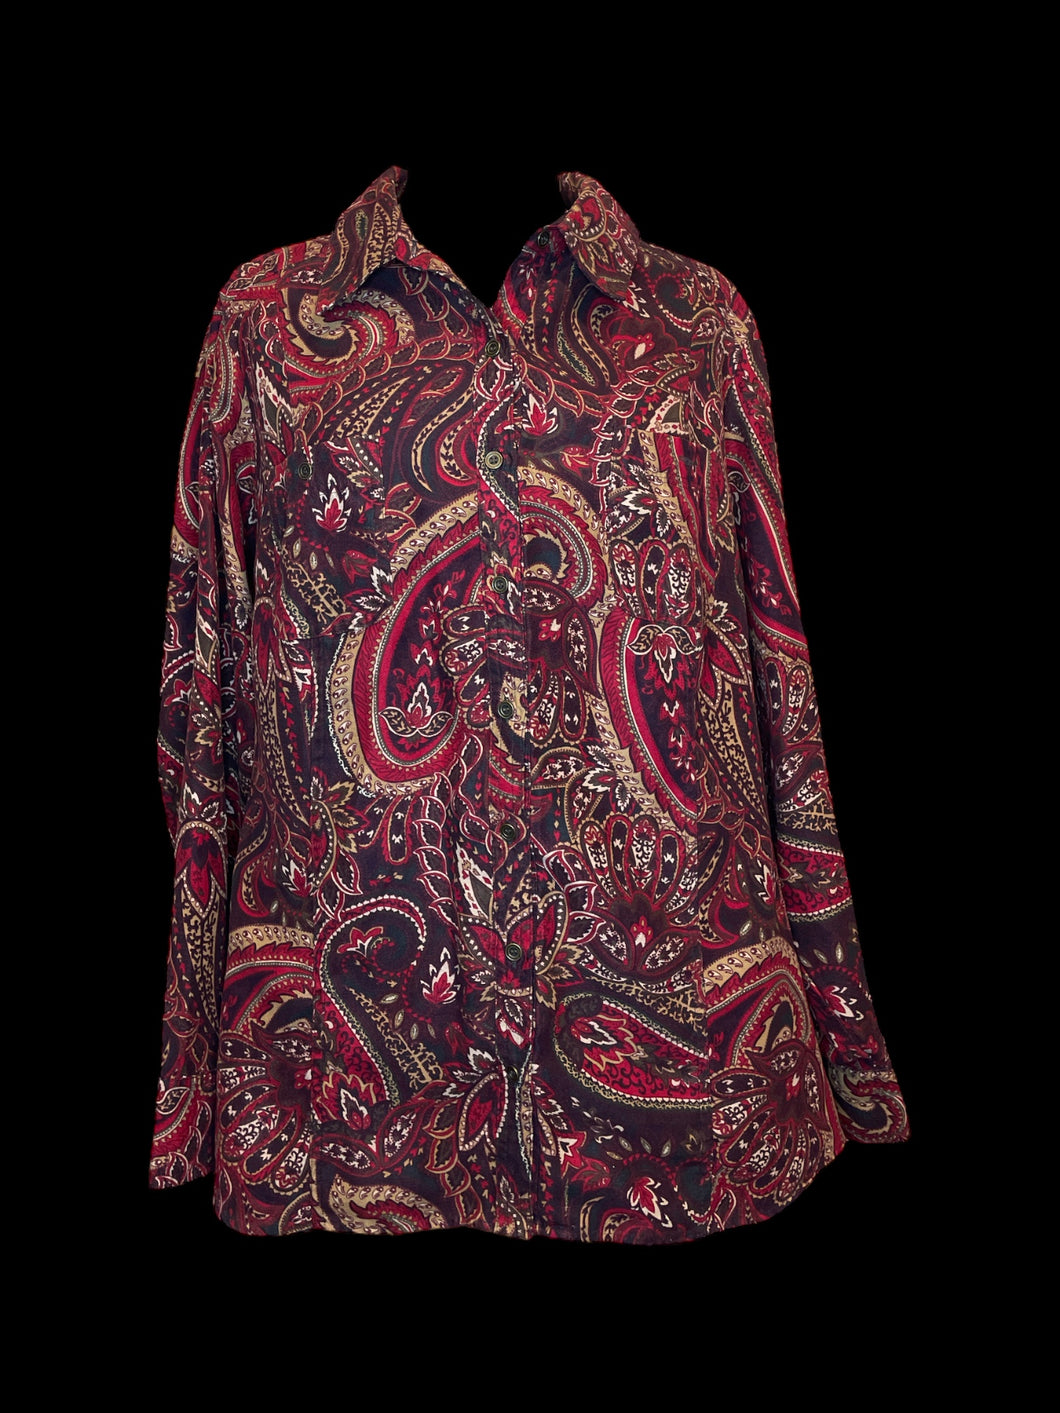 3X Vintage red, black, & gold paisley long sleeve button down top w/ folded collar, button cuffs, & chest pockets